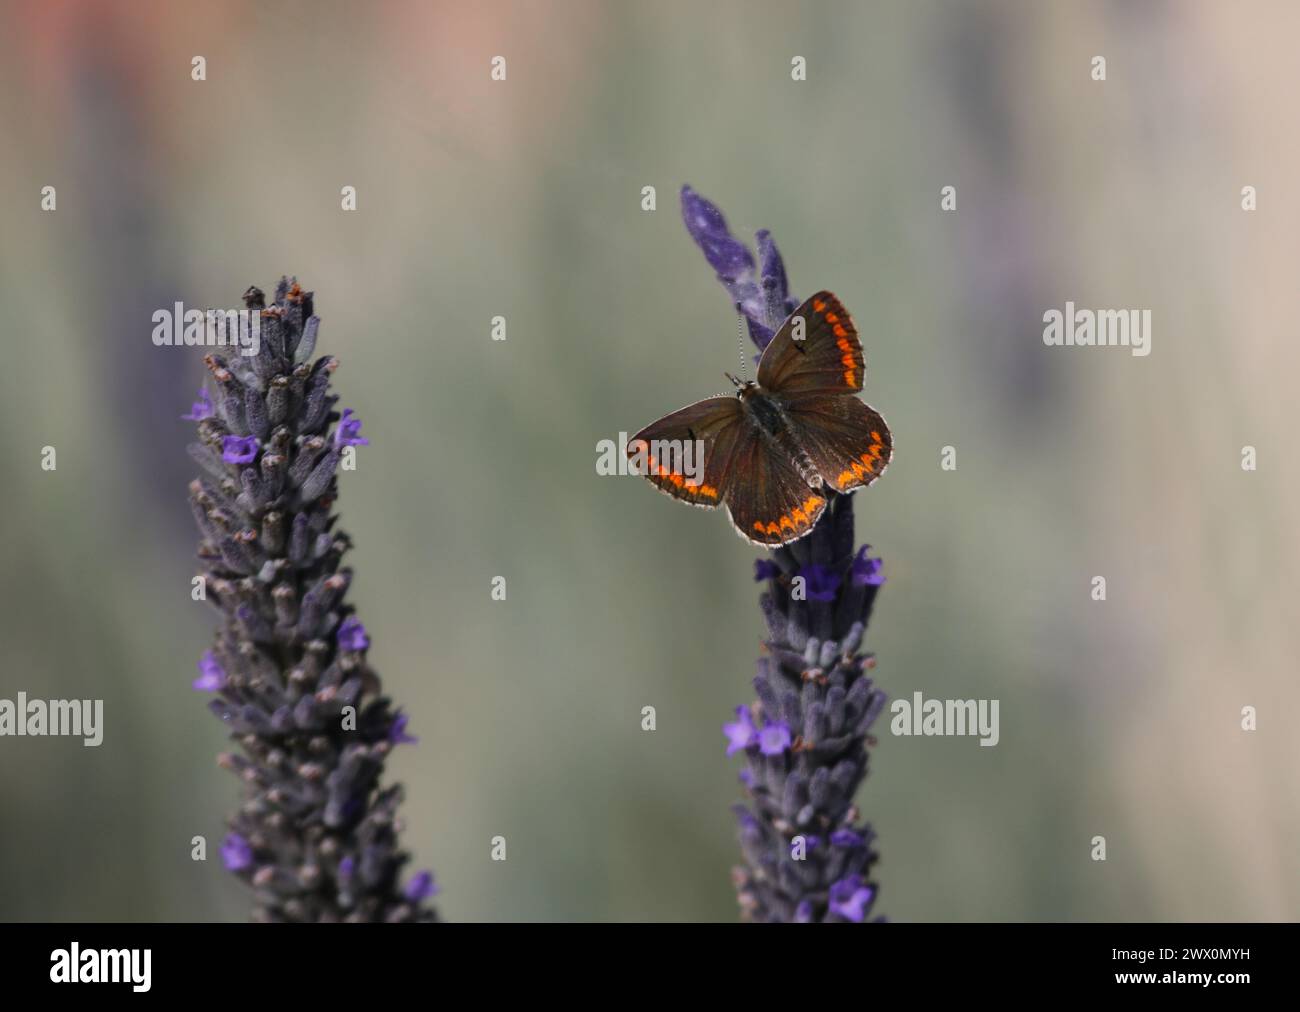 A Brown Argus butterfly (Aricia agestis) feeding on lavendar. Shot on the island of Kythira, Greece. Stock Photo